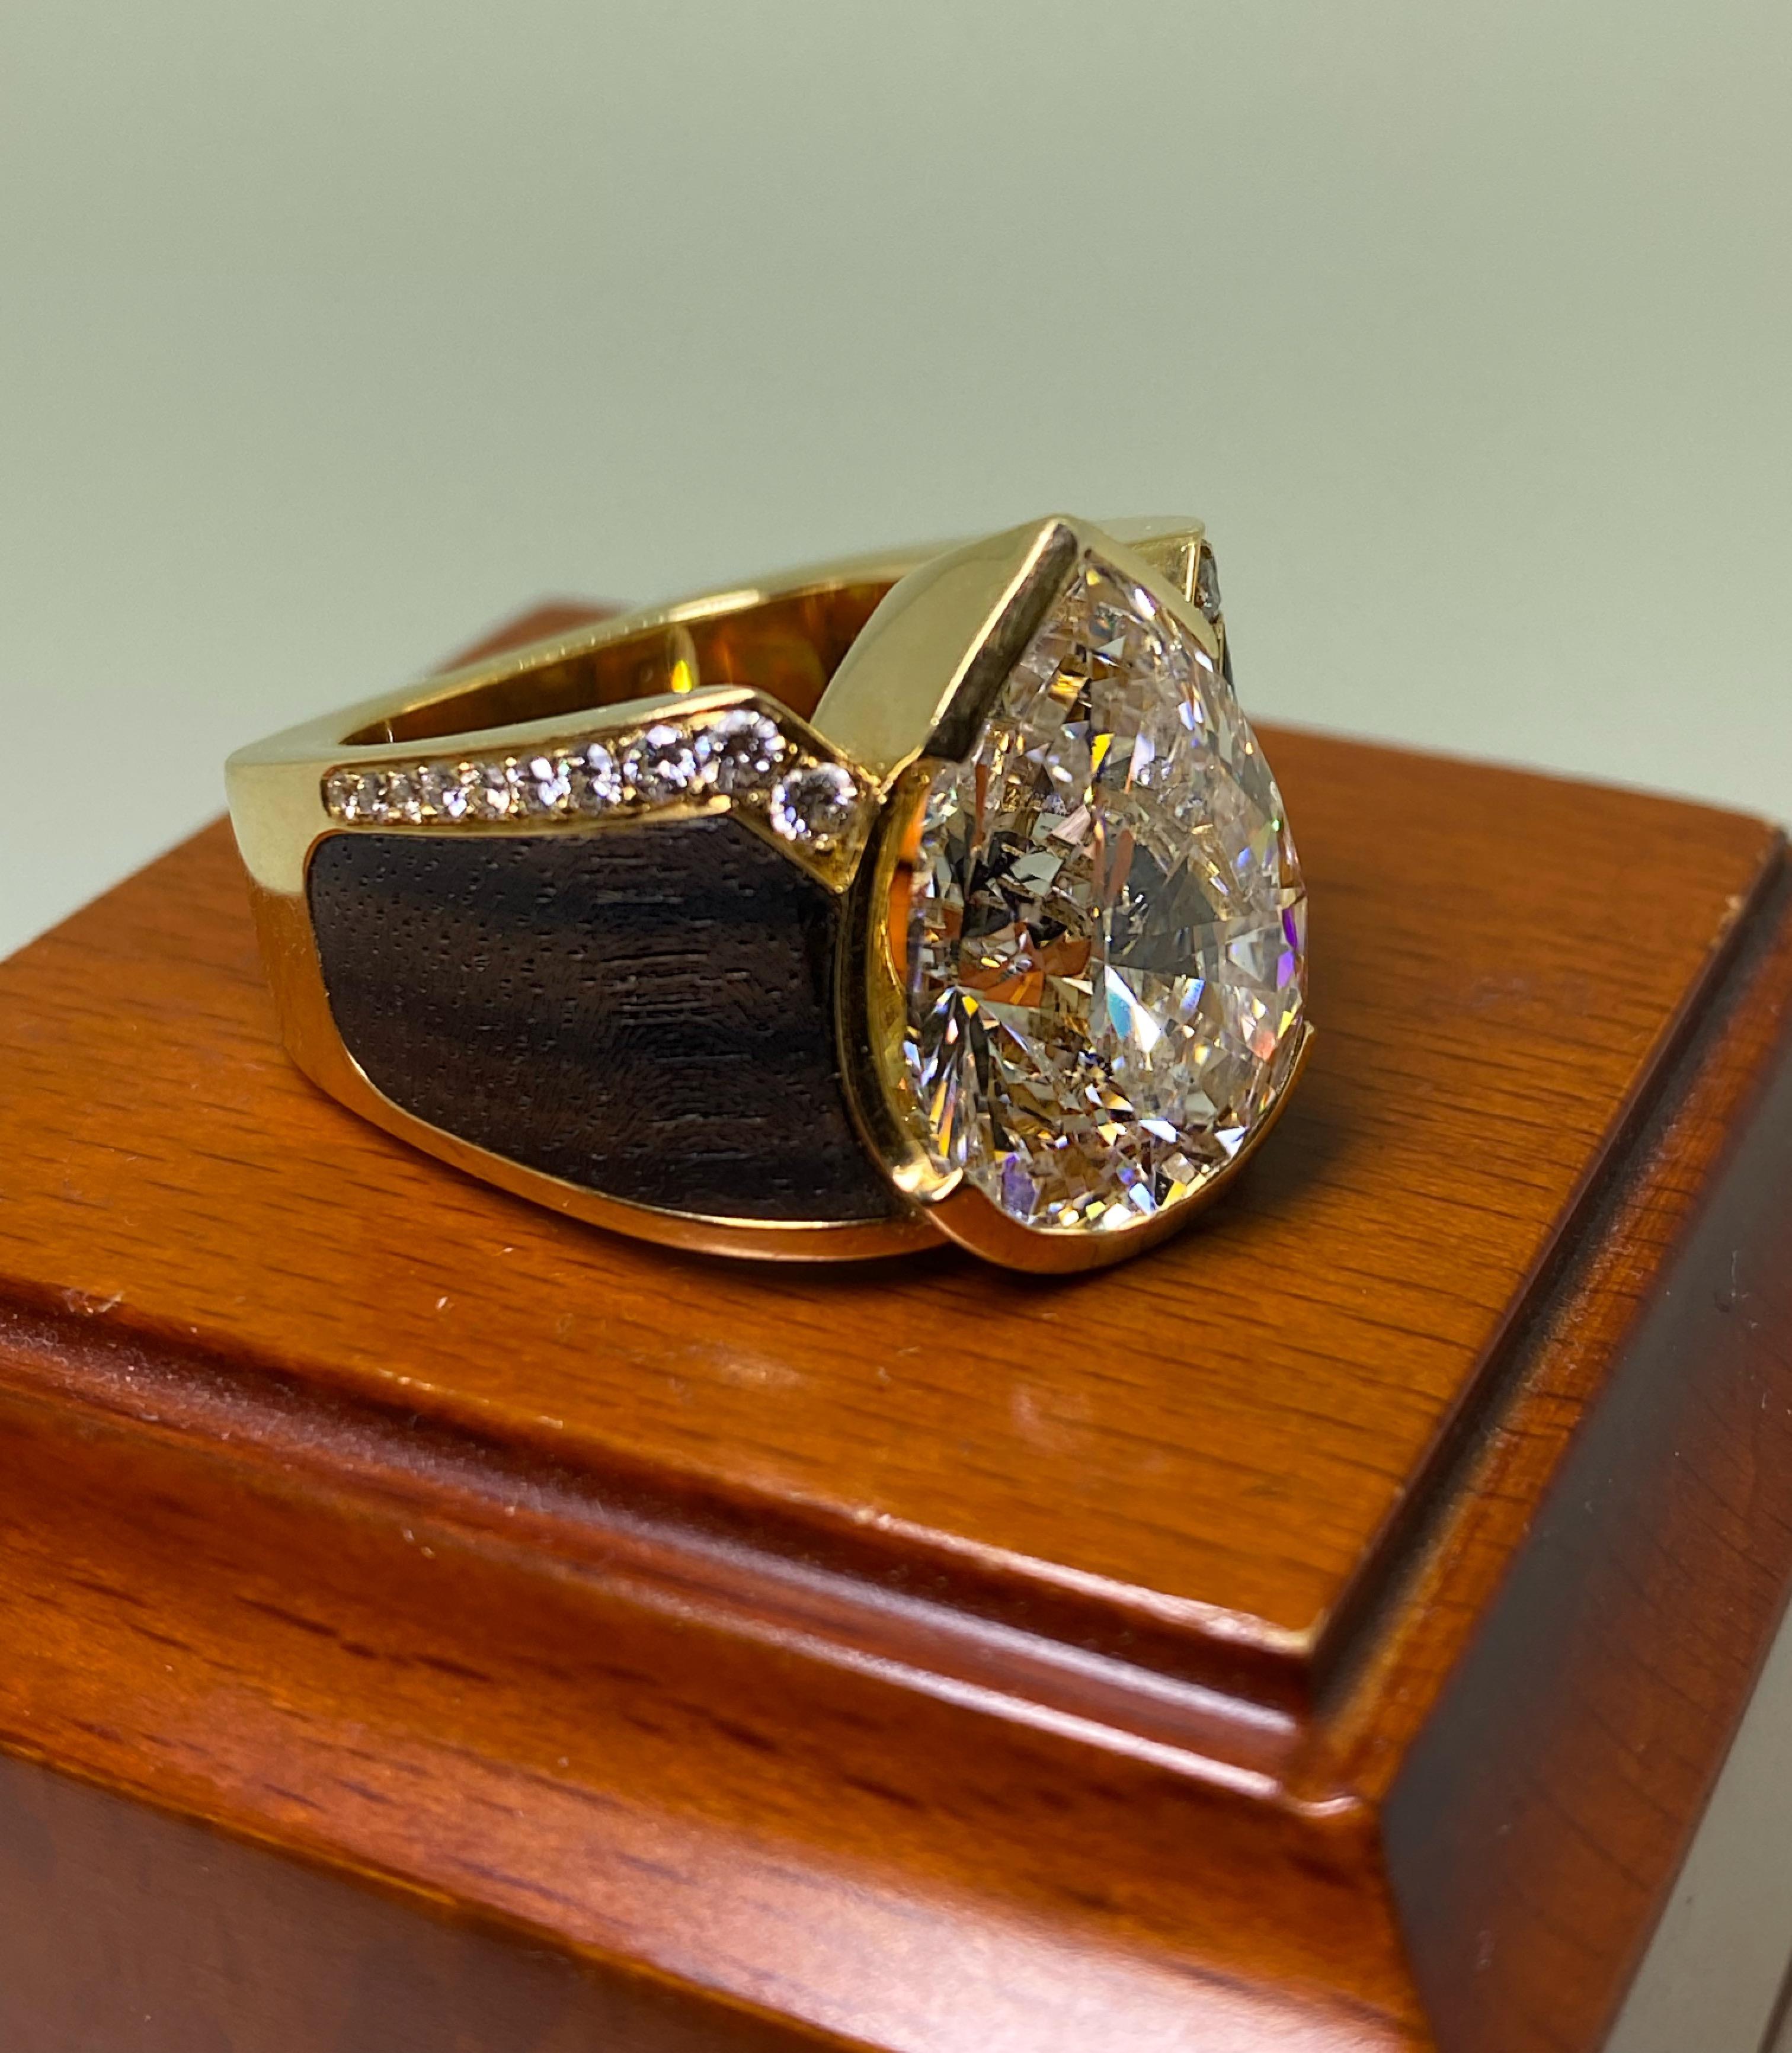 Retro Natural 12.00ct Pear Shaped/Cut Diamond Ring in 18K Yellow Gold, valued at 490K